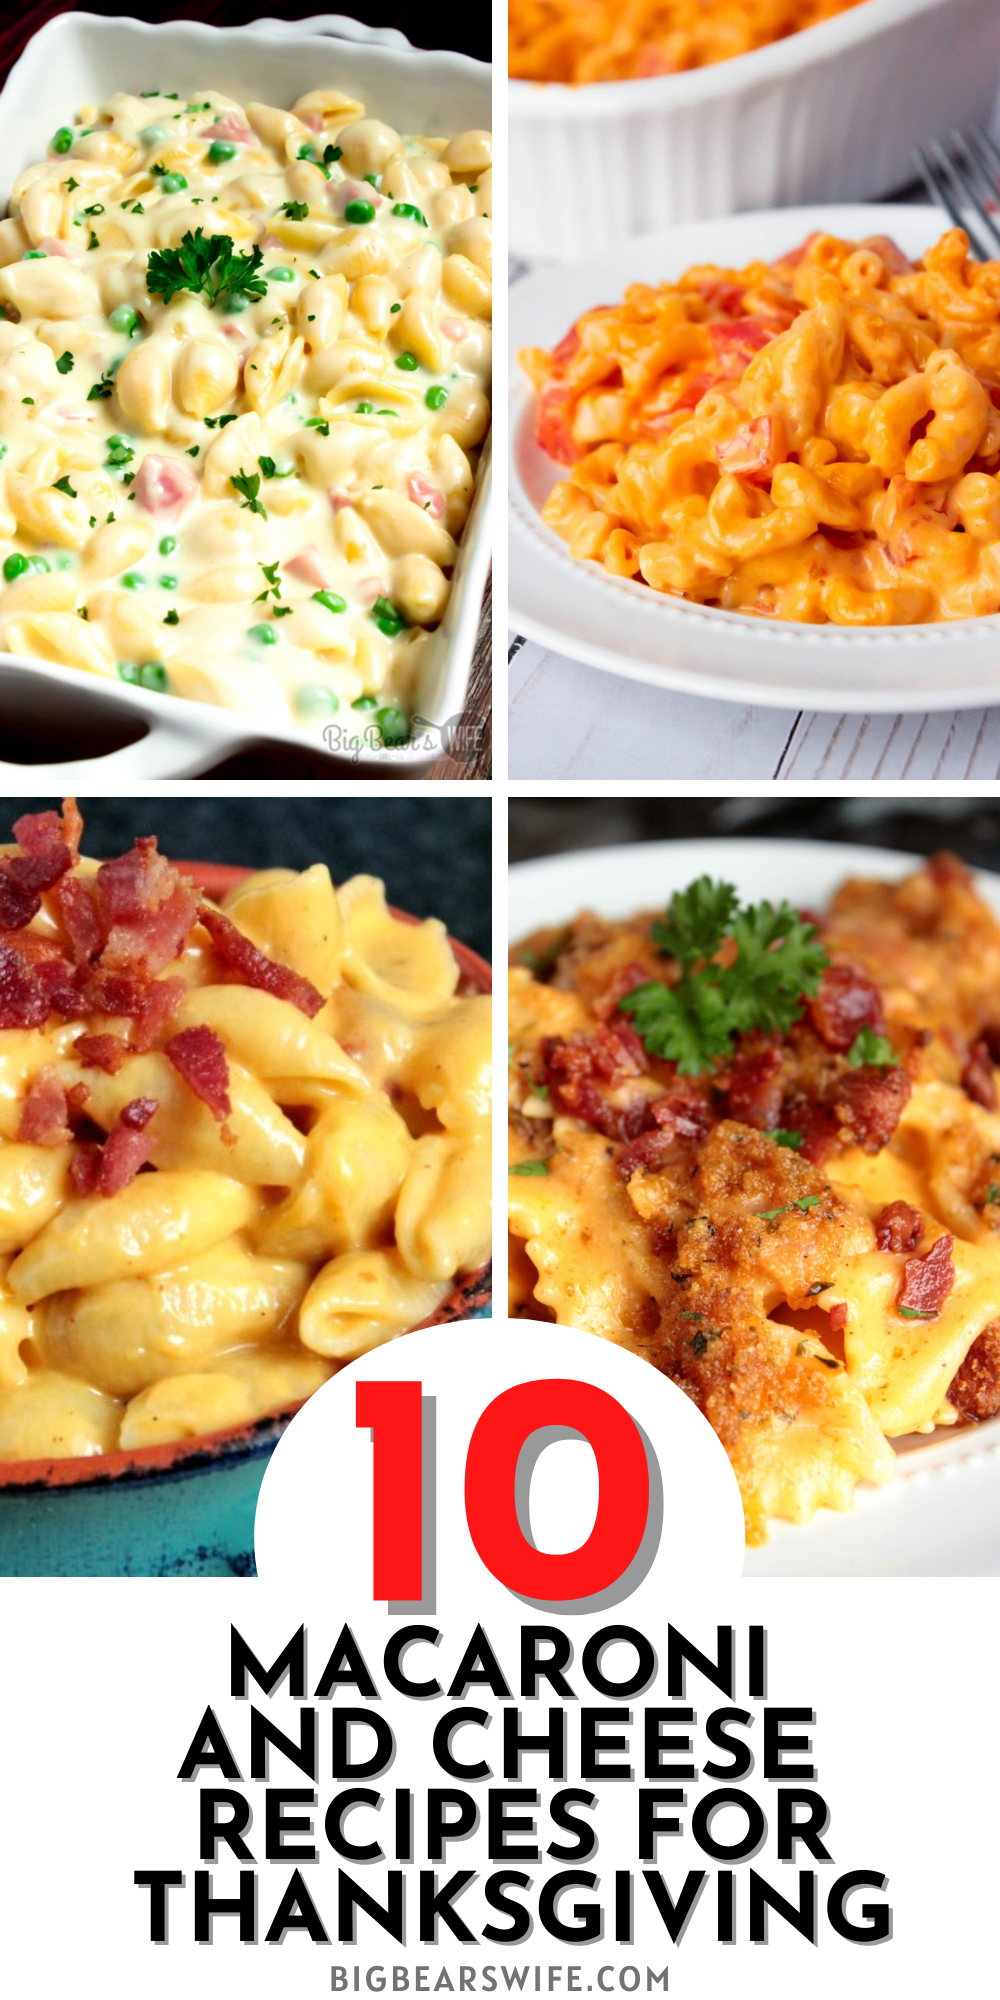 If you love Macaroni and Cheese then you know it has to be on the table at Thanksgiving! Here are 10 Macaroni and Cheese Recipes for Thanksgiving that you’re going to love!

 via @bigbearswife